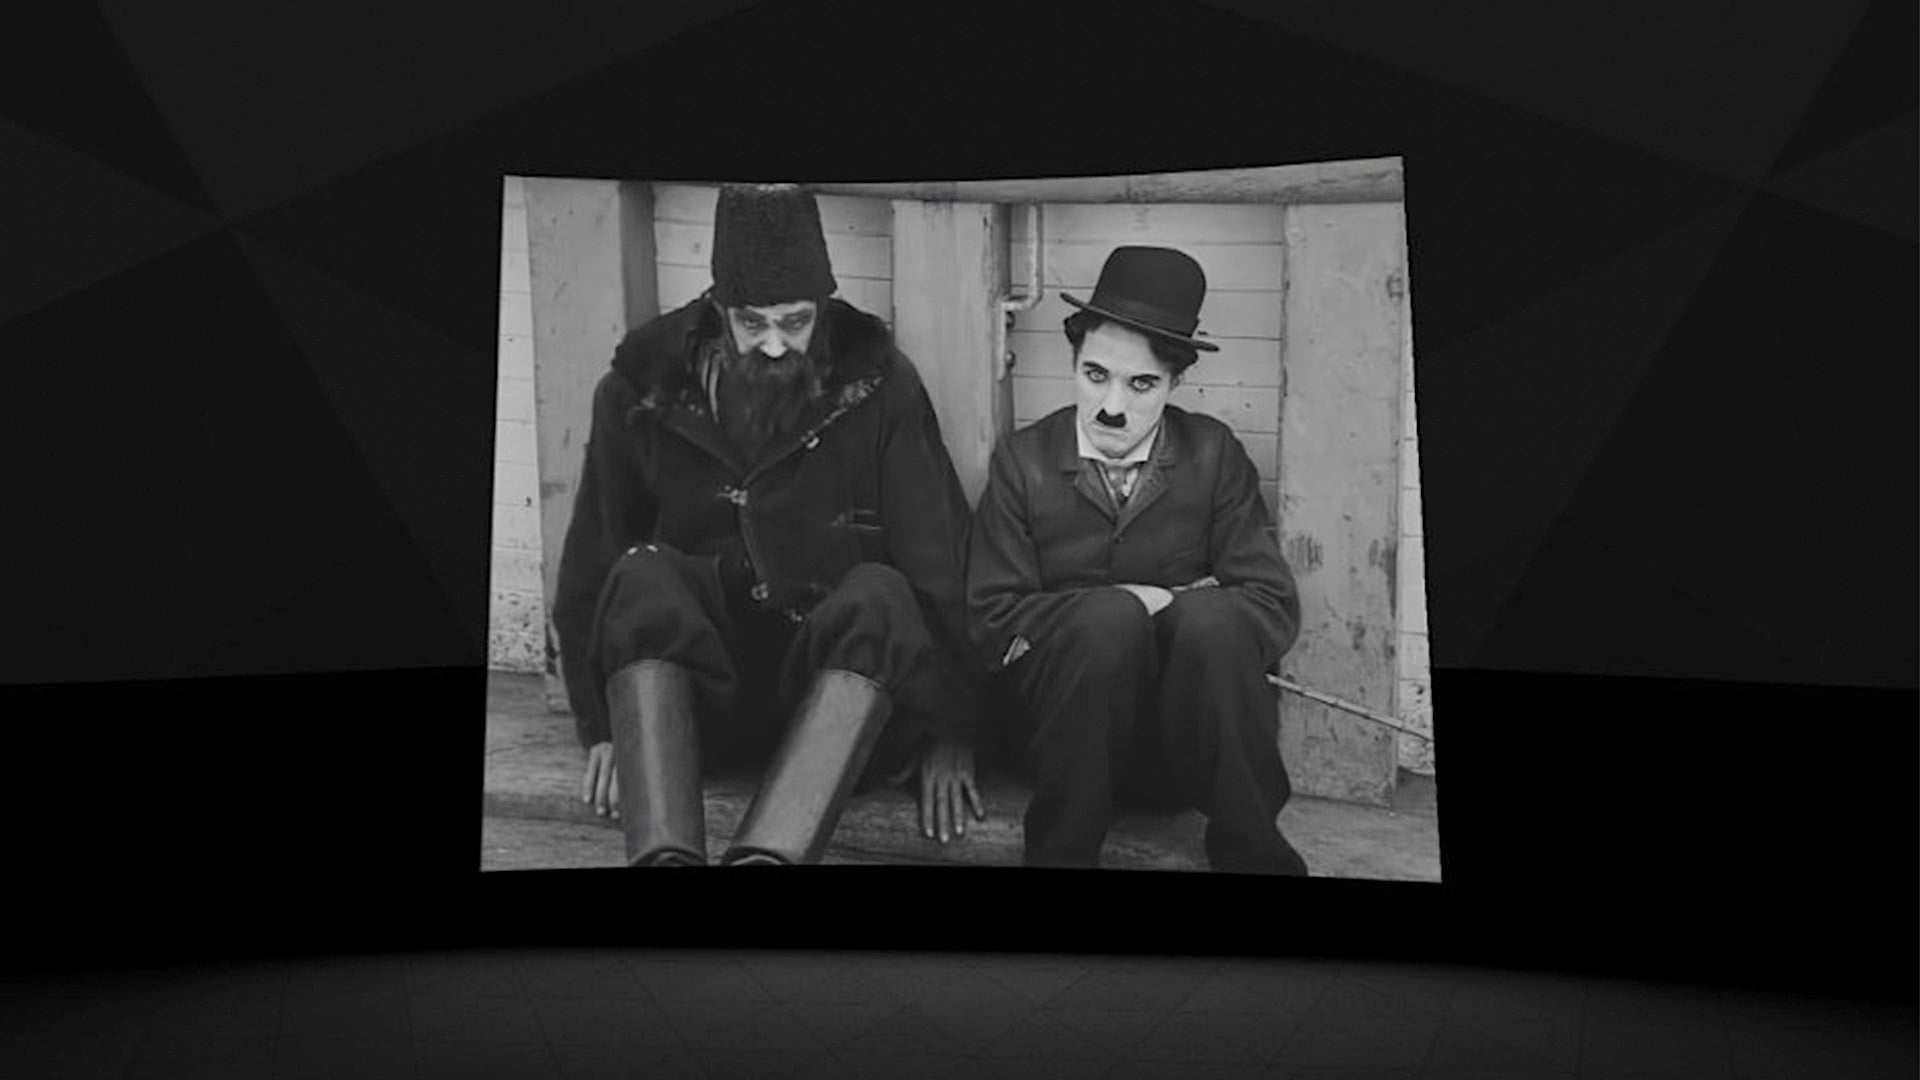 AI turns Chaplin classic into a 3D movie – and you can watch it with your Meta Quest